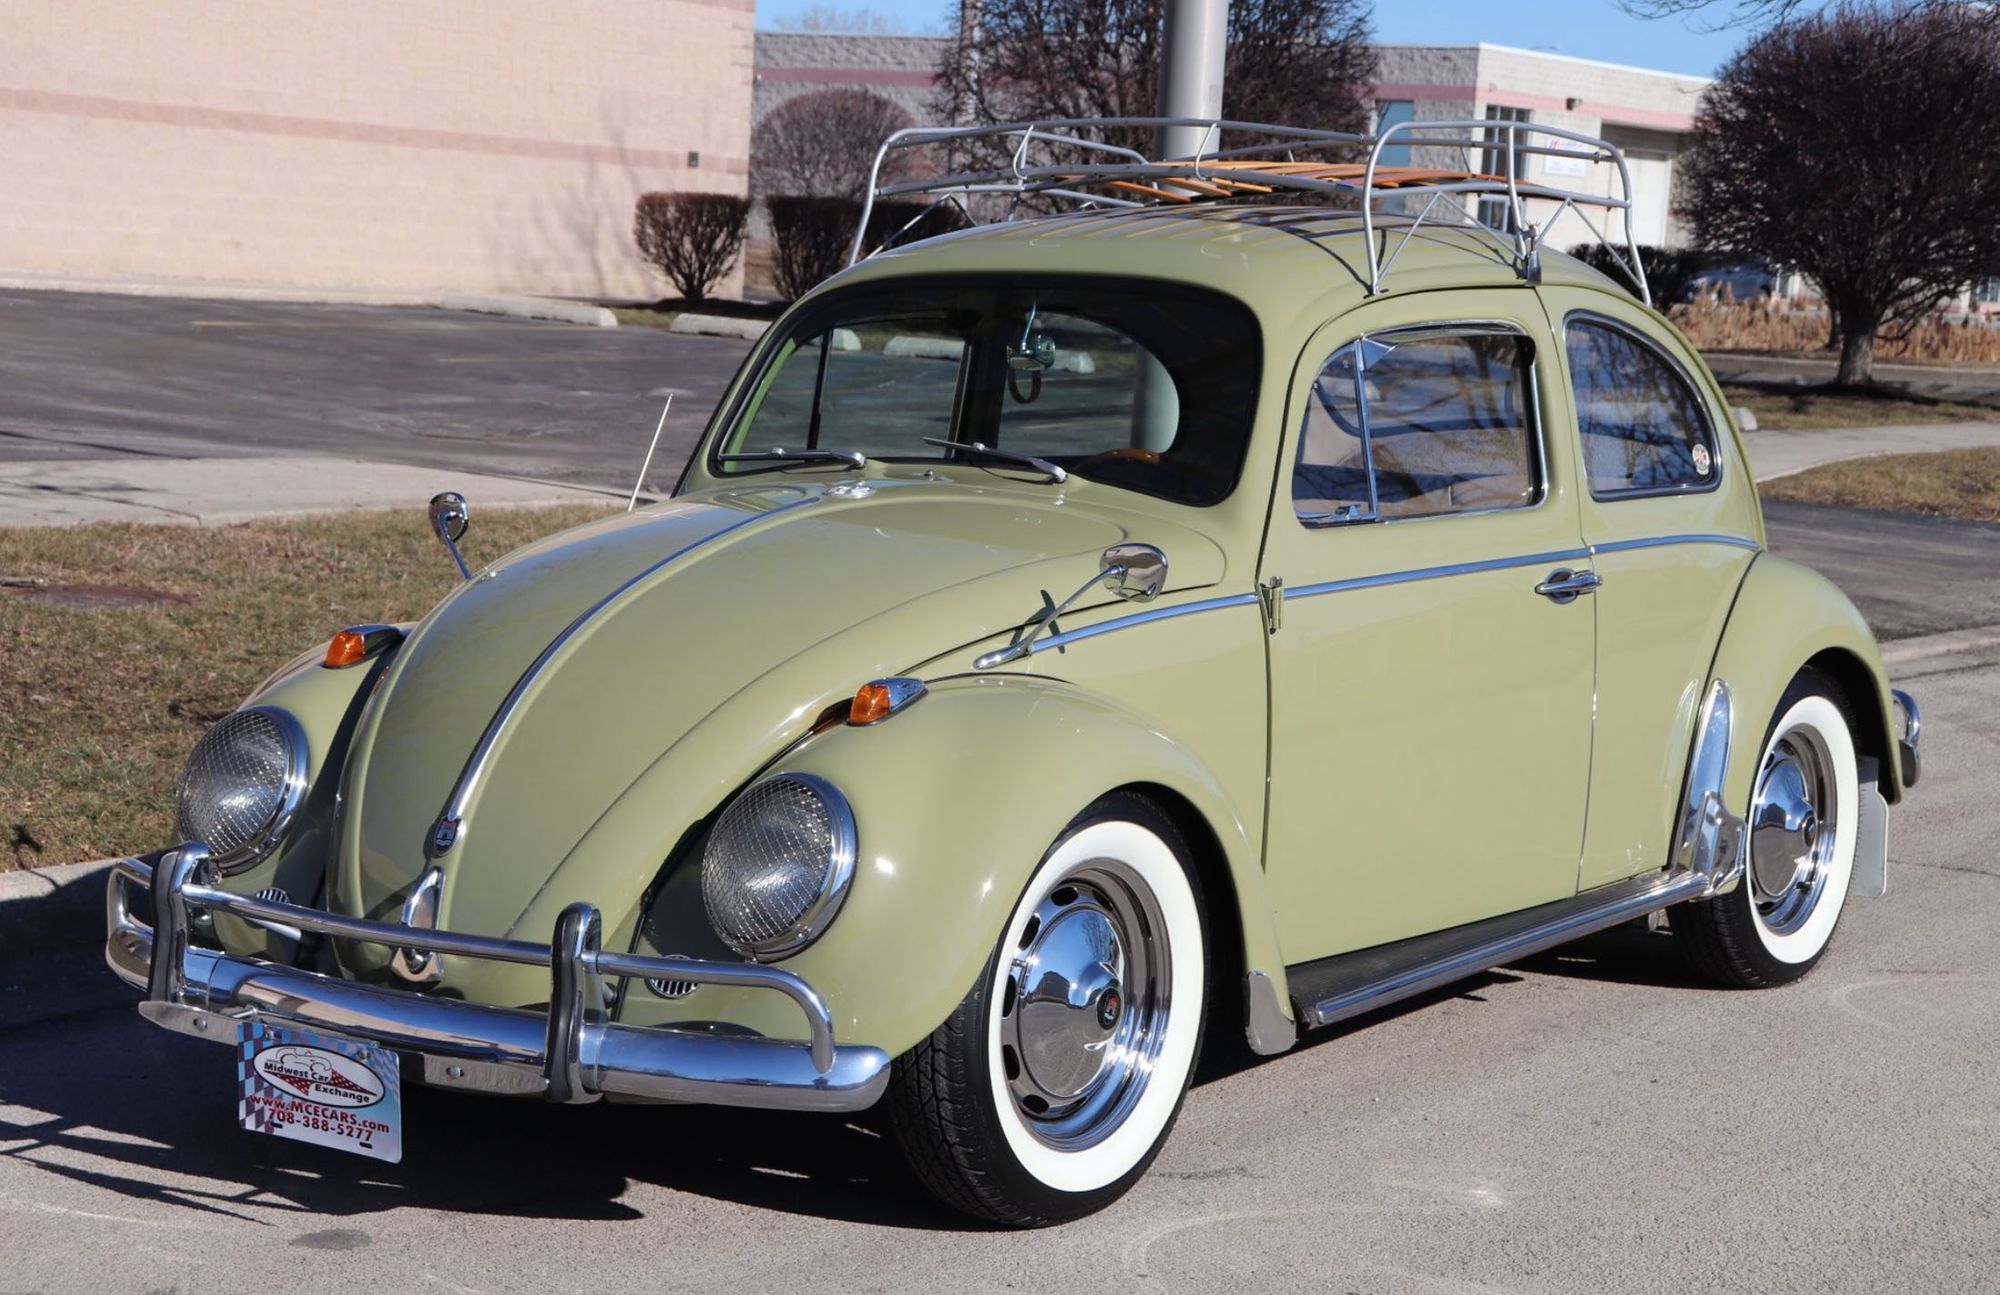 Take The Scenic Route In This 1960 Volkswagen Beetle